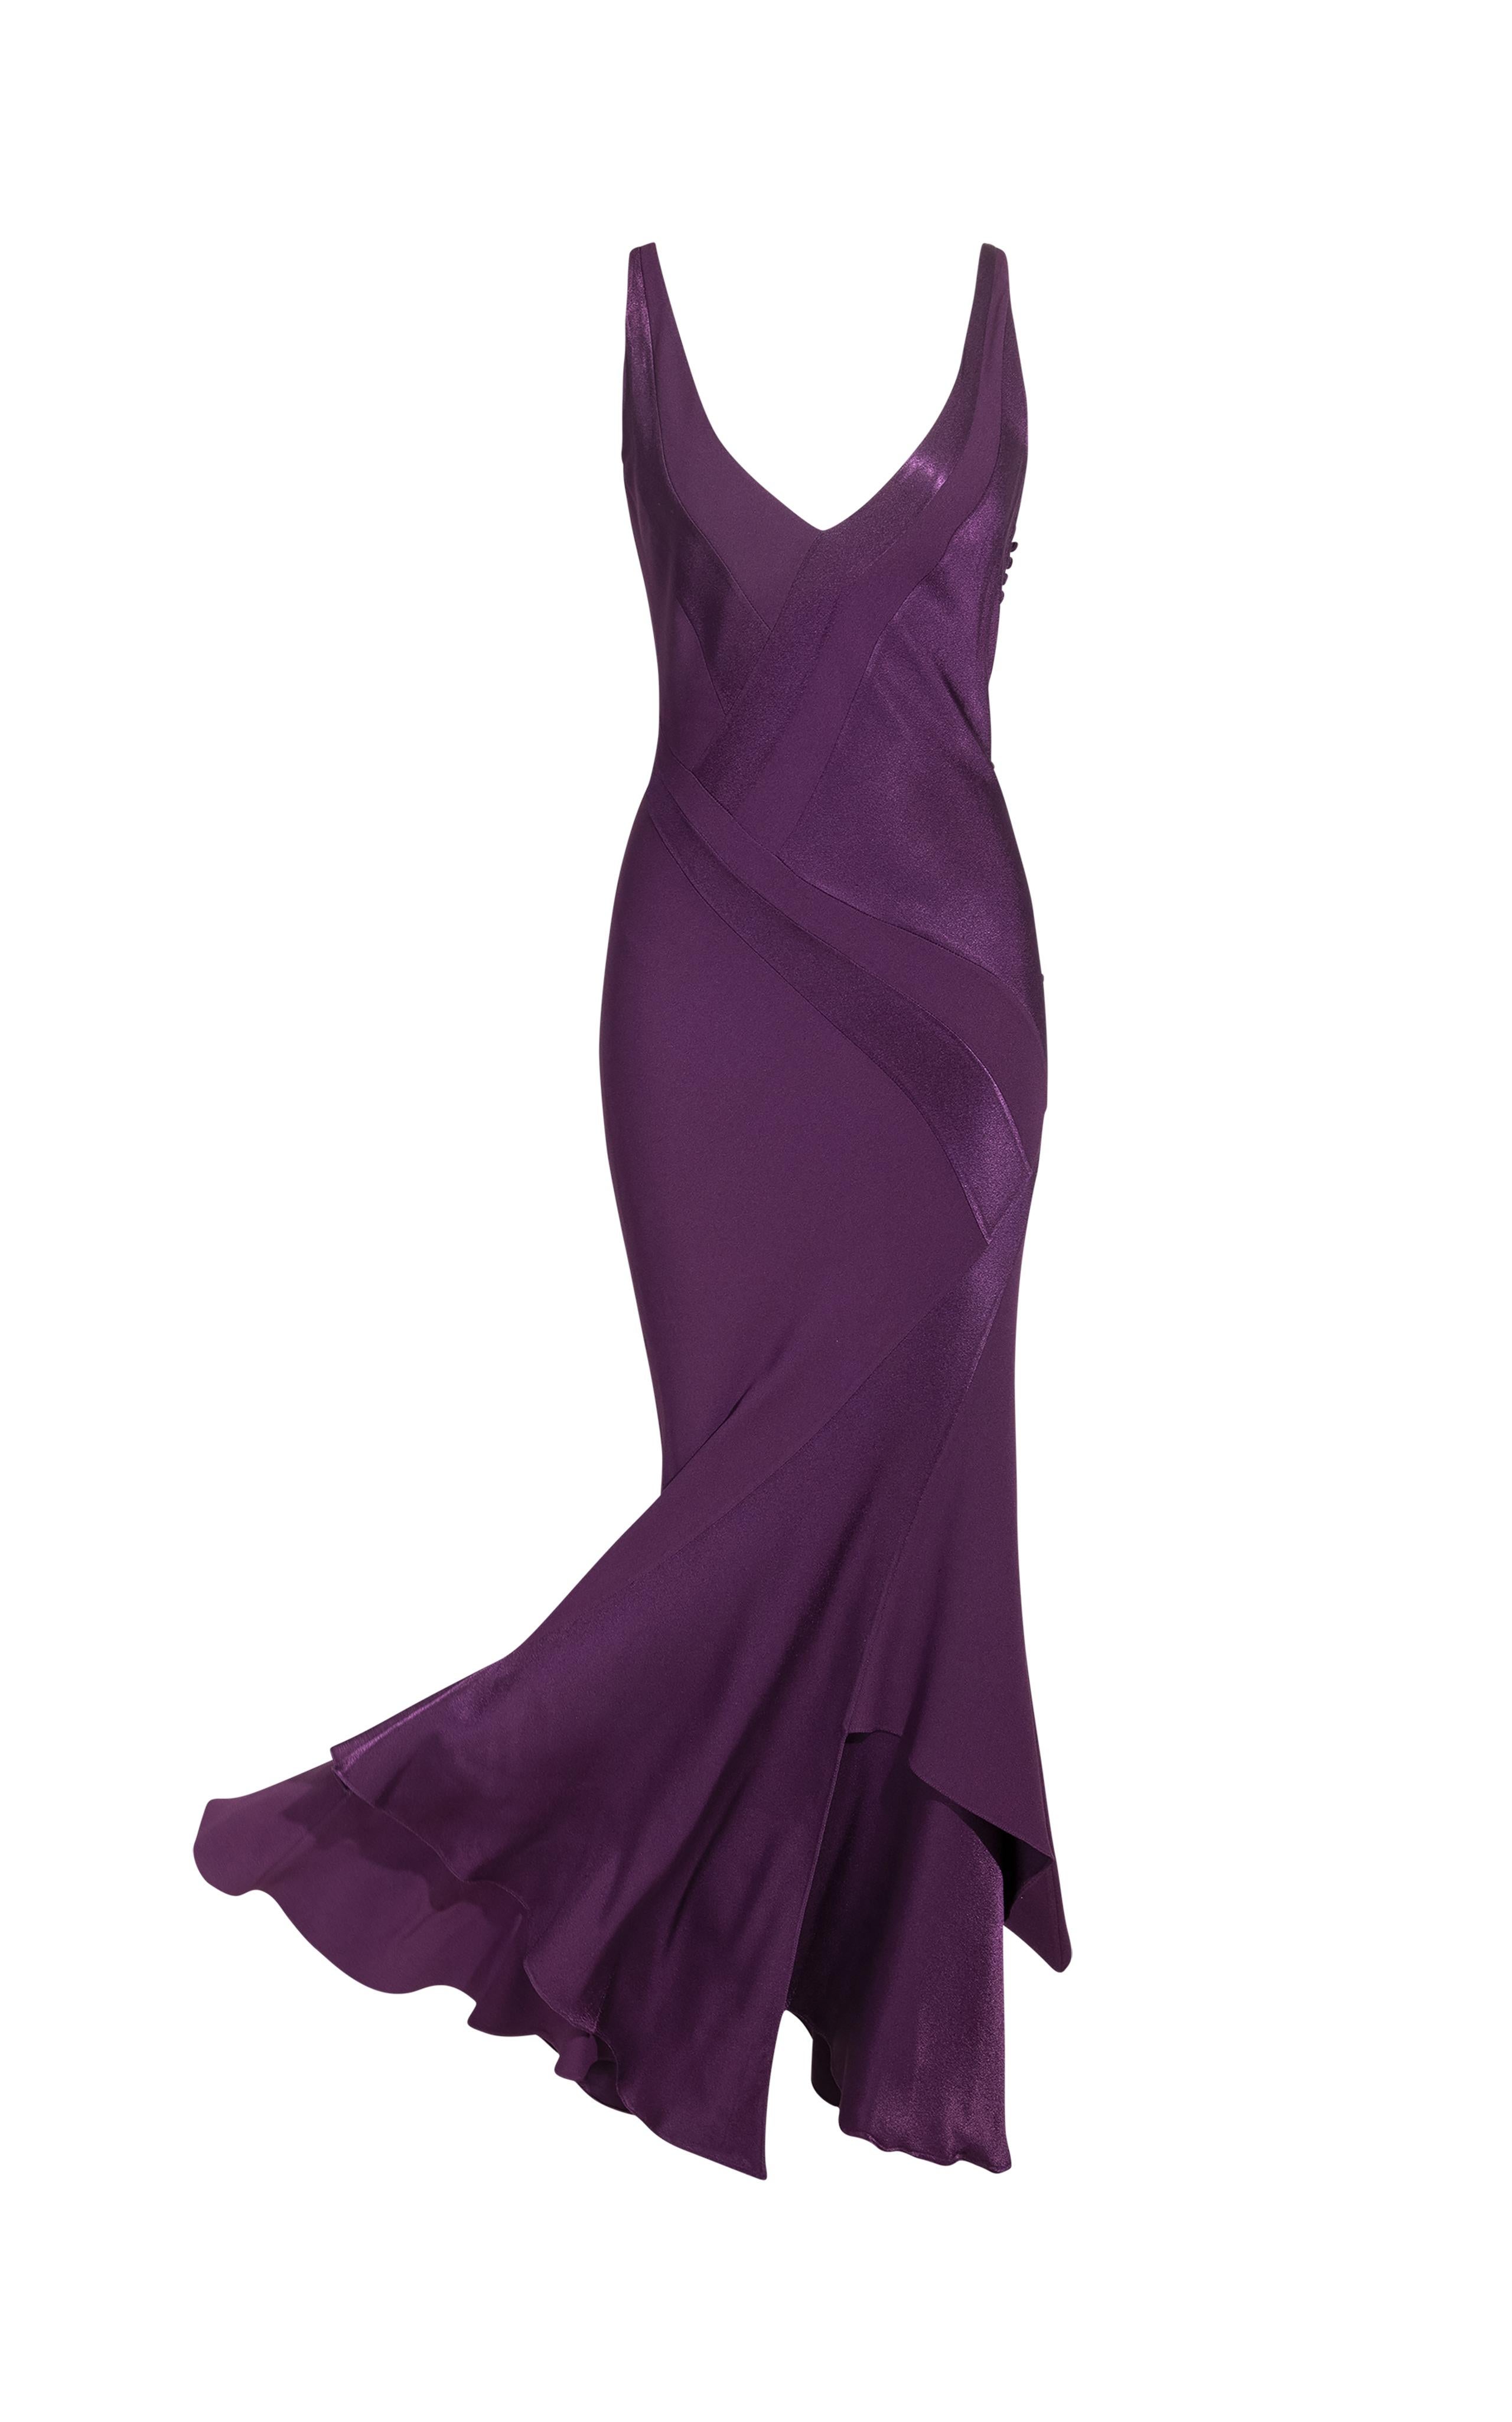 Women's S/S 2005 Christian Dior by John Galliano Purple V-Neck Gown